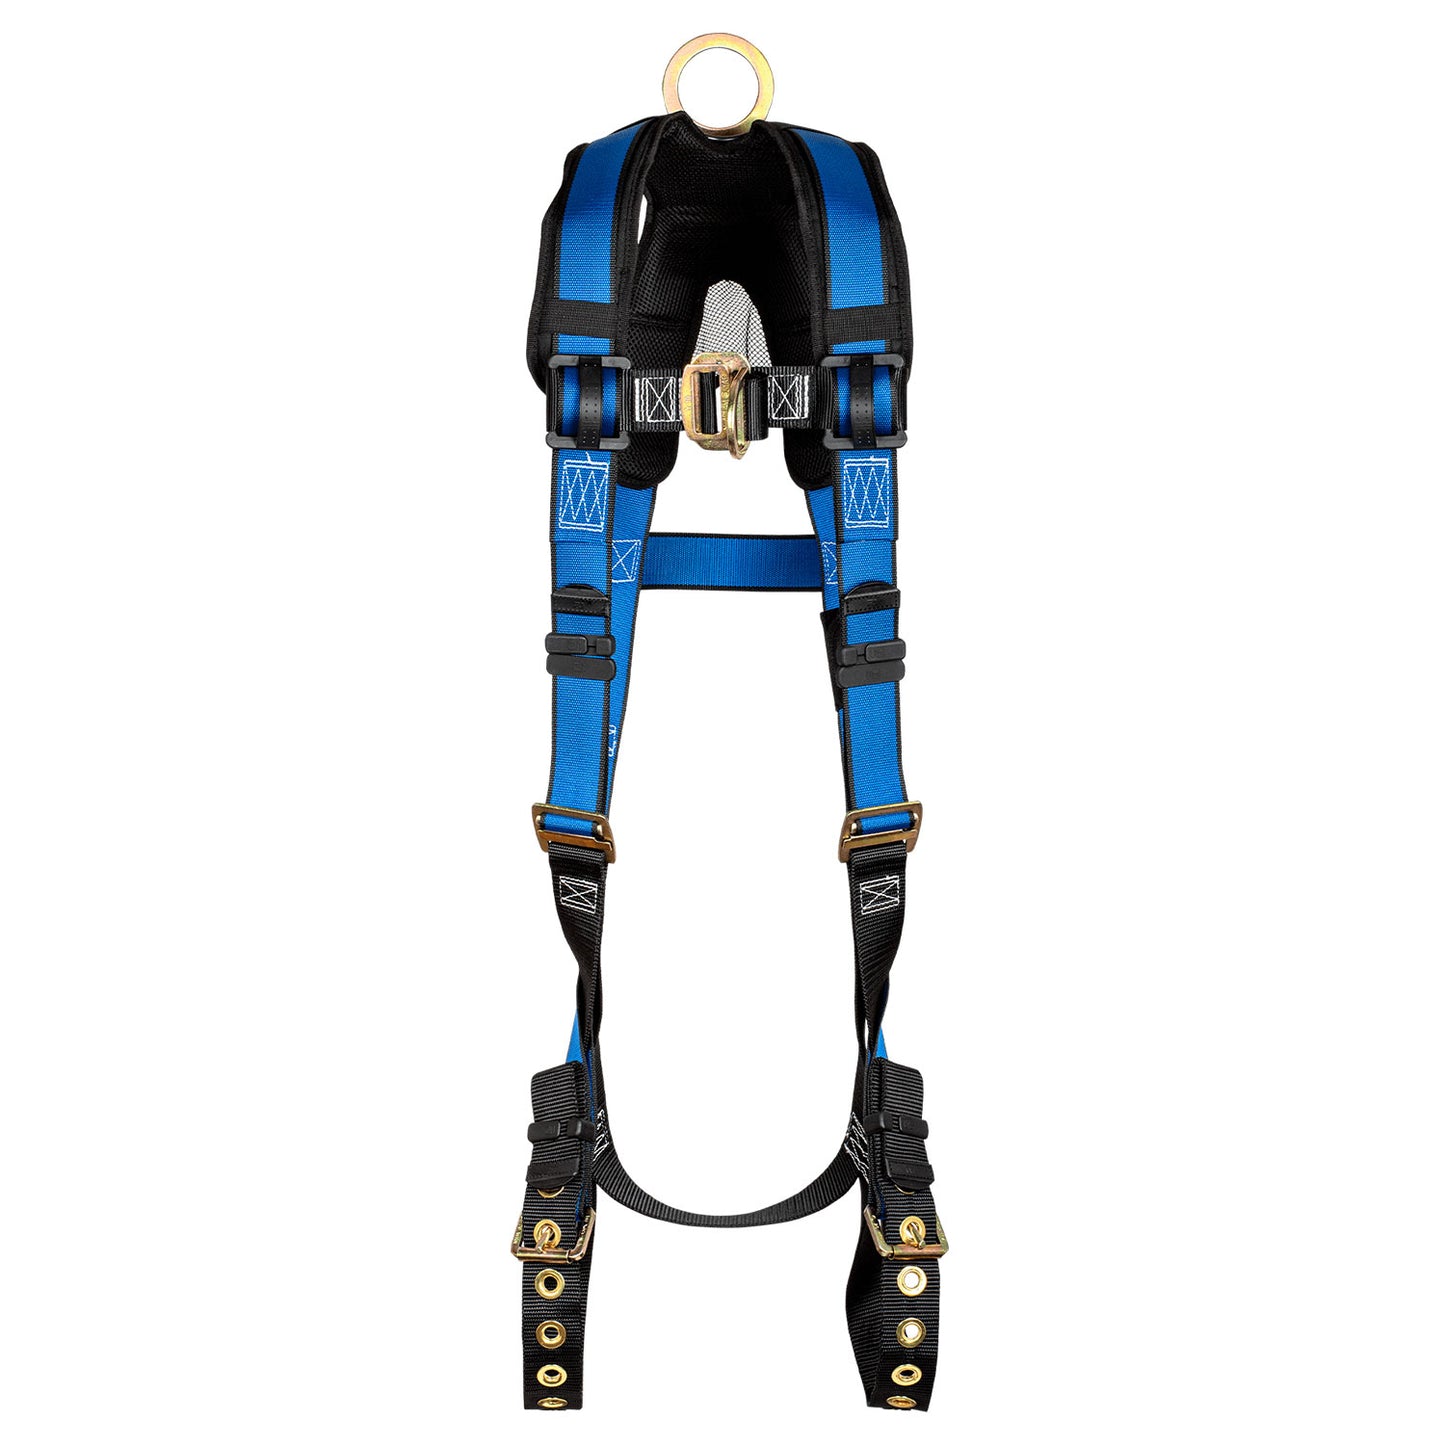 FallTech Contractor+ Full-Body Climbing Harness | Non-Belted | XS | 7016BFDXS